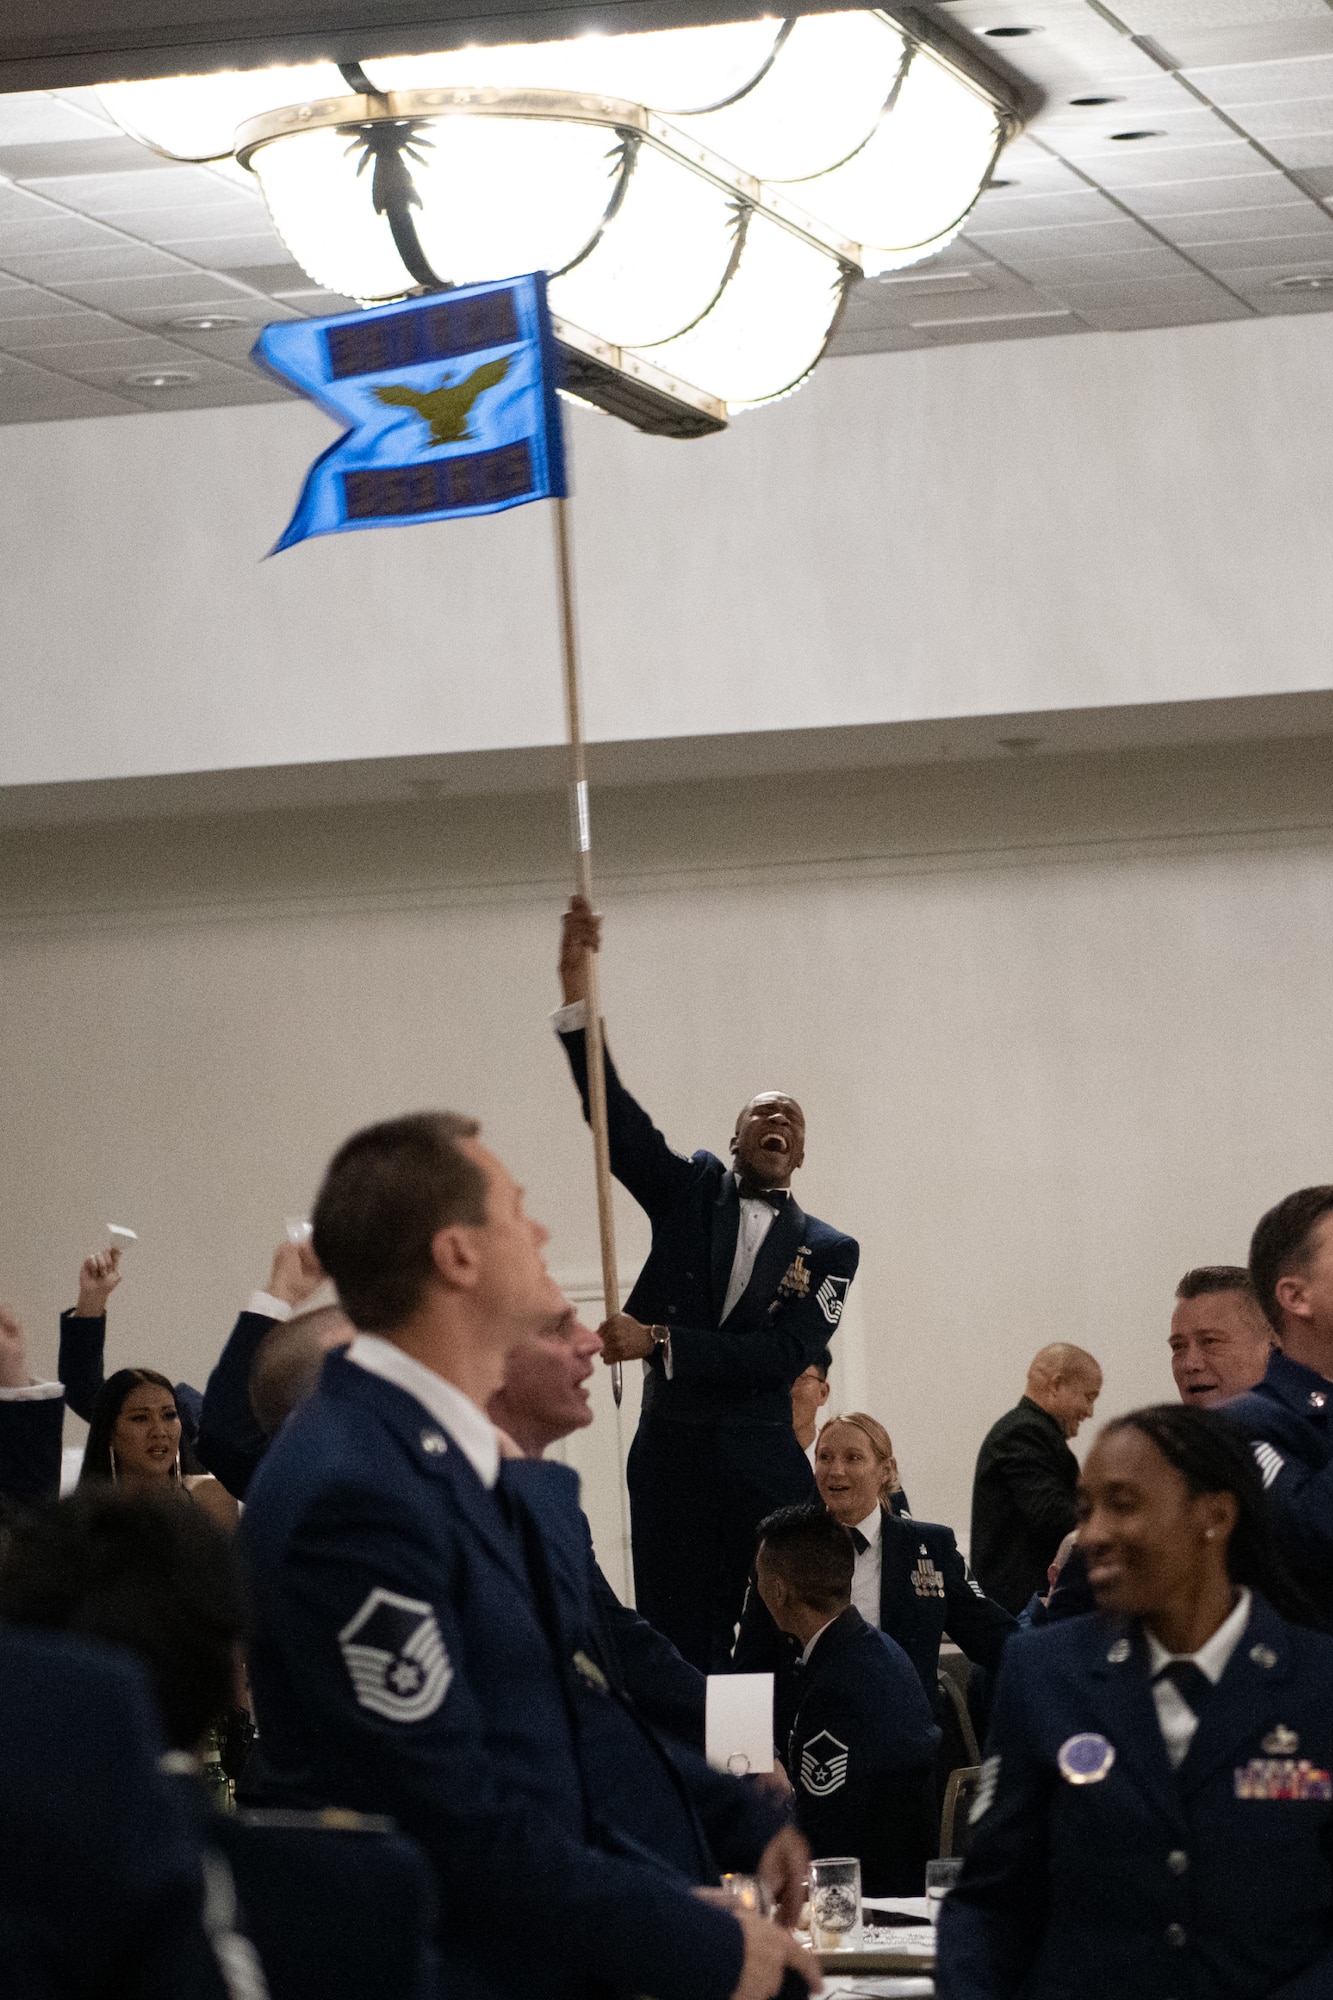 An Airmen holds up his squadron's guidon during a training event